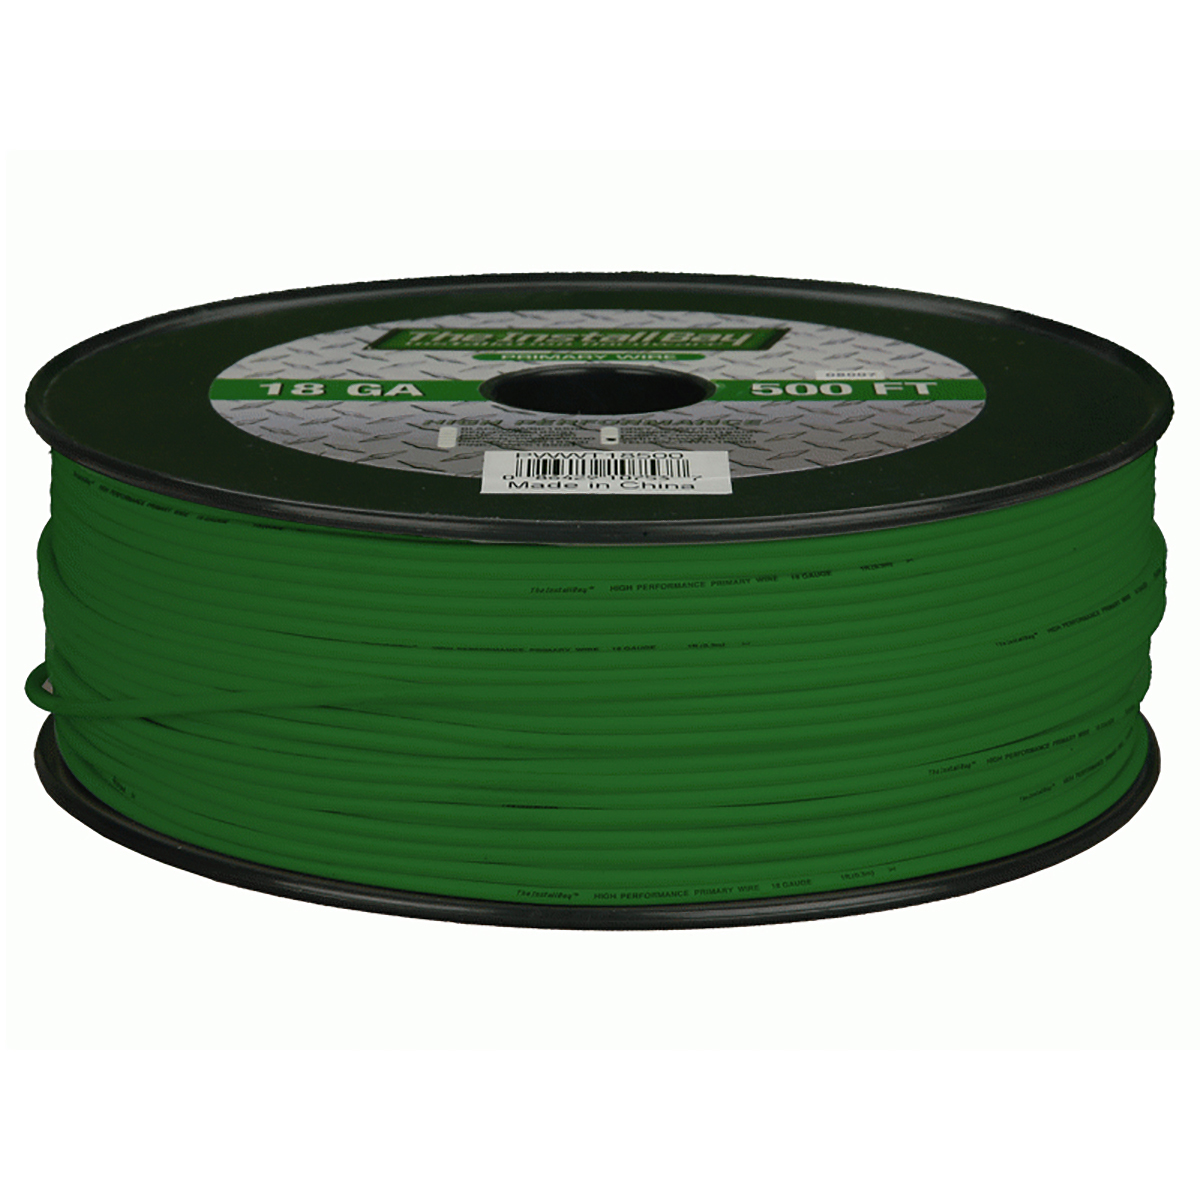 PRIMARY WIRE 16 GAUGE GREEN COIL OF 500 FEET